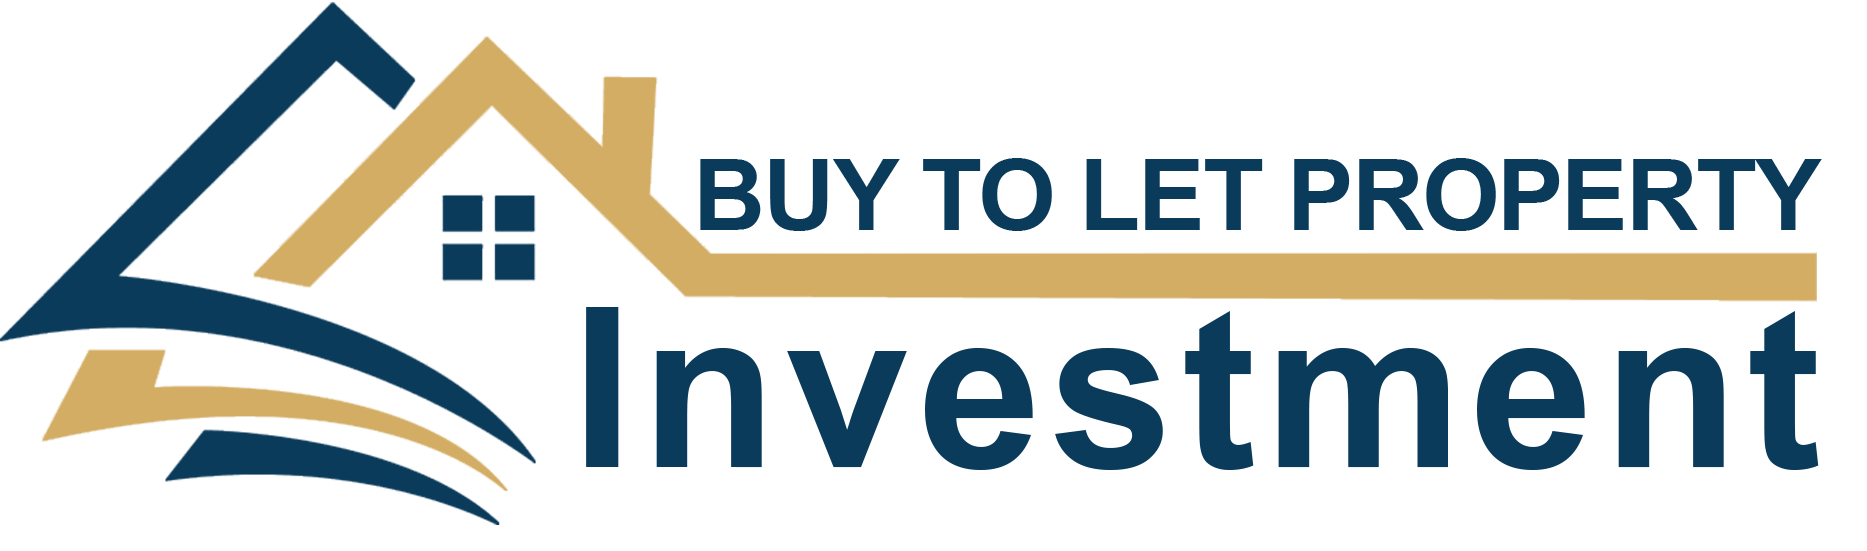 Buy to Let Property Investment | Investment Properties UK